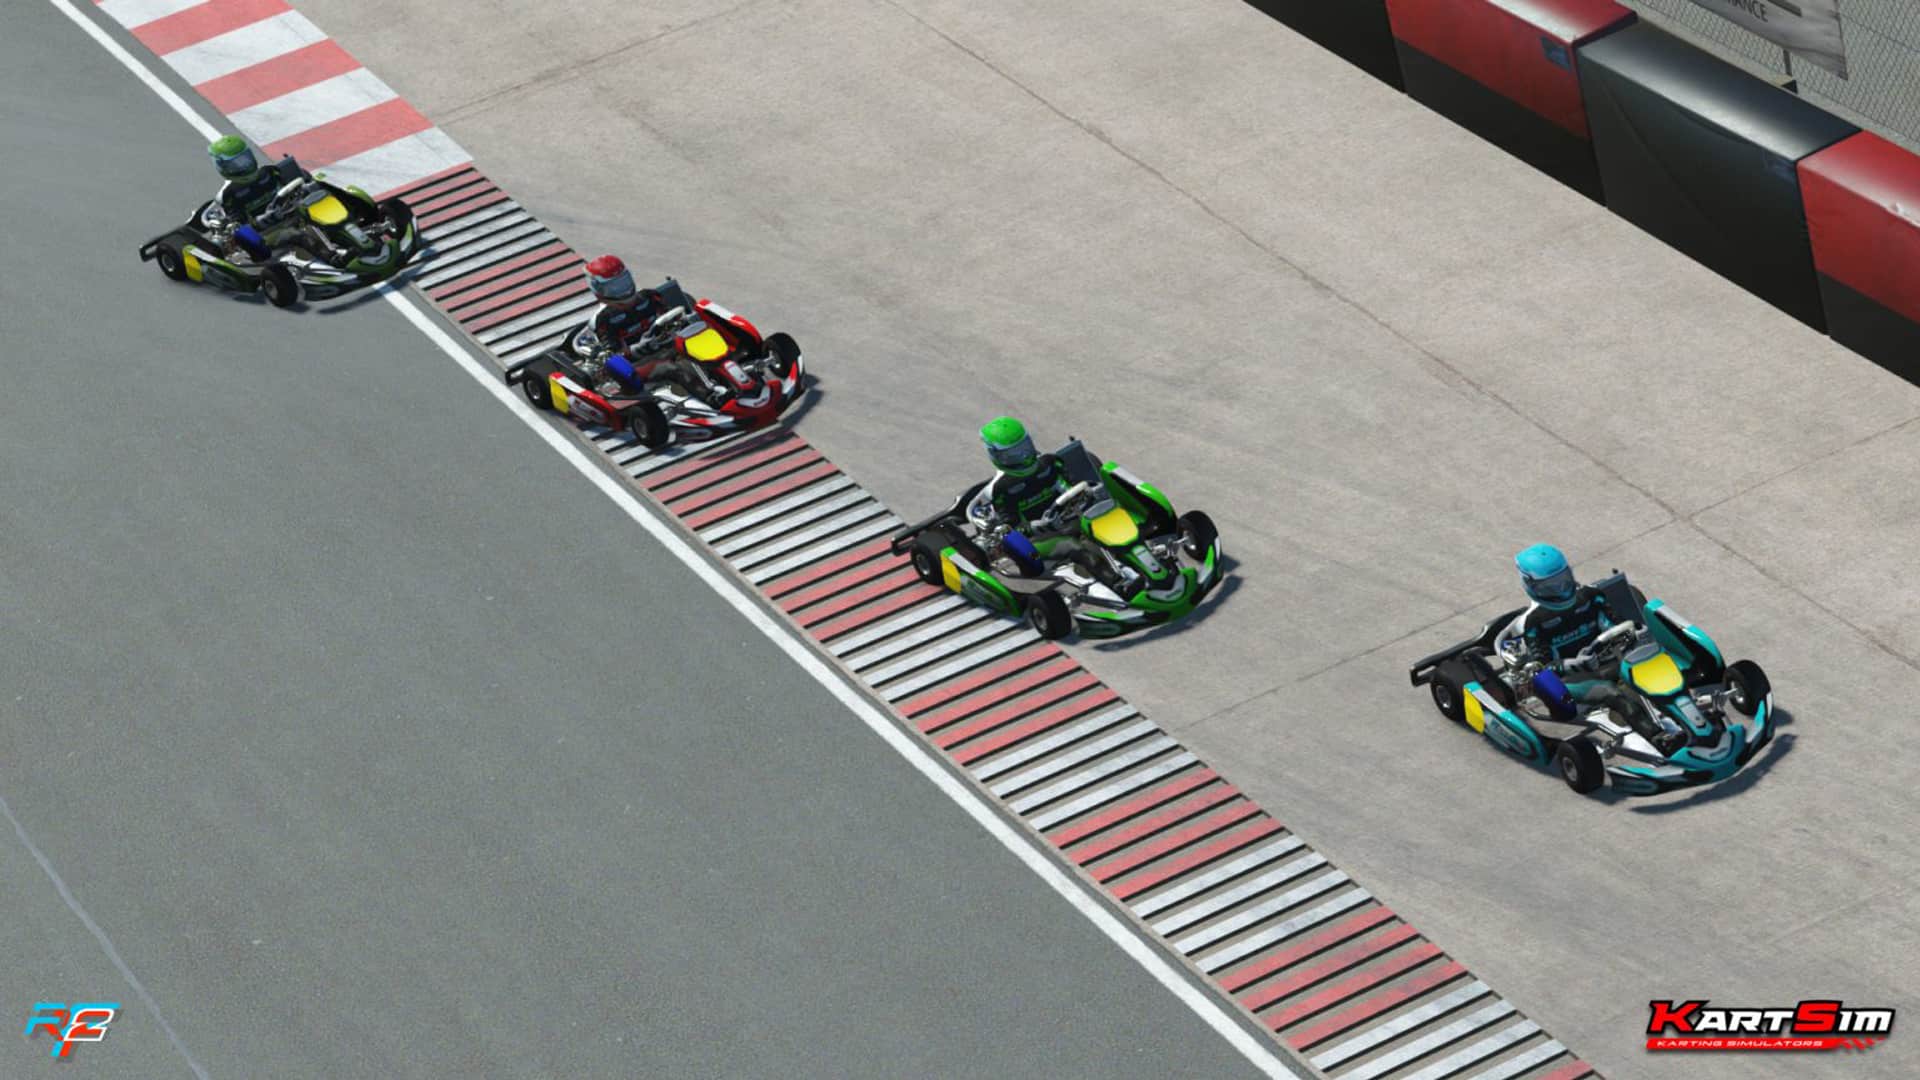 New karts and tracks arrive for rFactor 2’s KartSim content